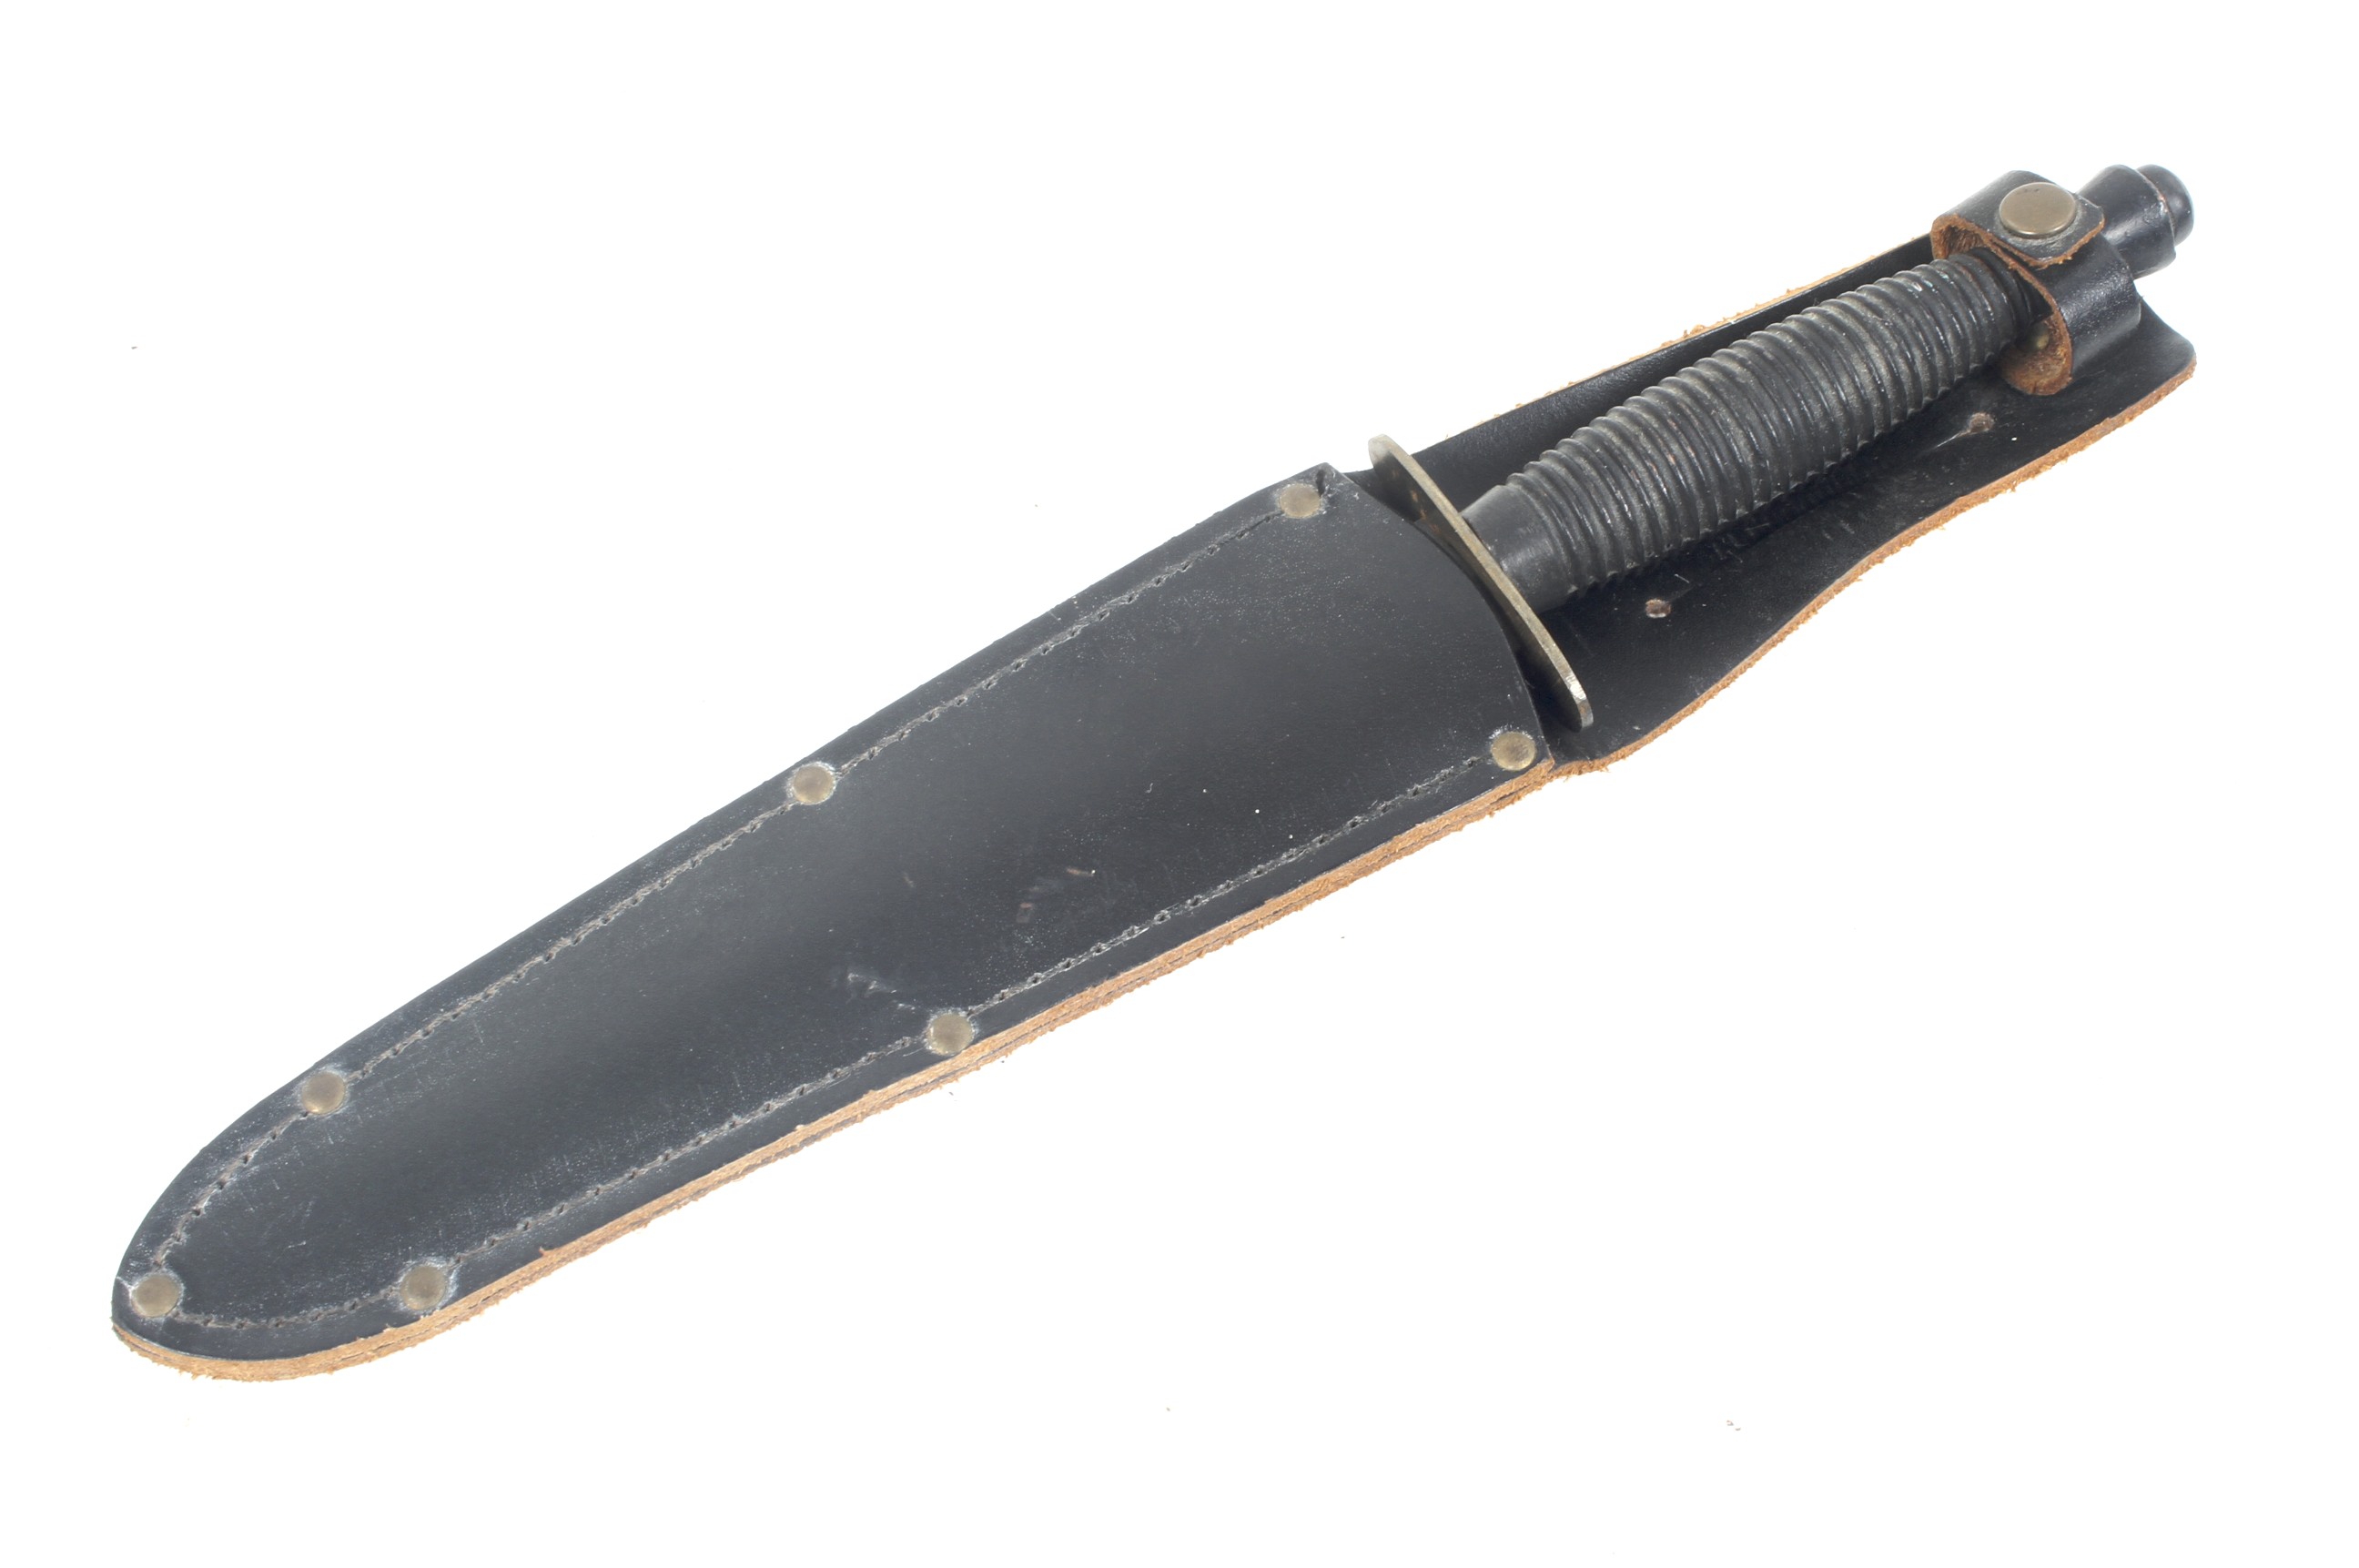 A reproduction of the 1940s Fairburn Sykes fighting knife. - Image 3 of 3